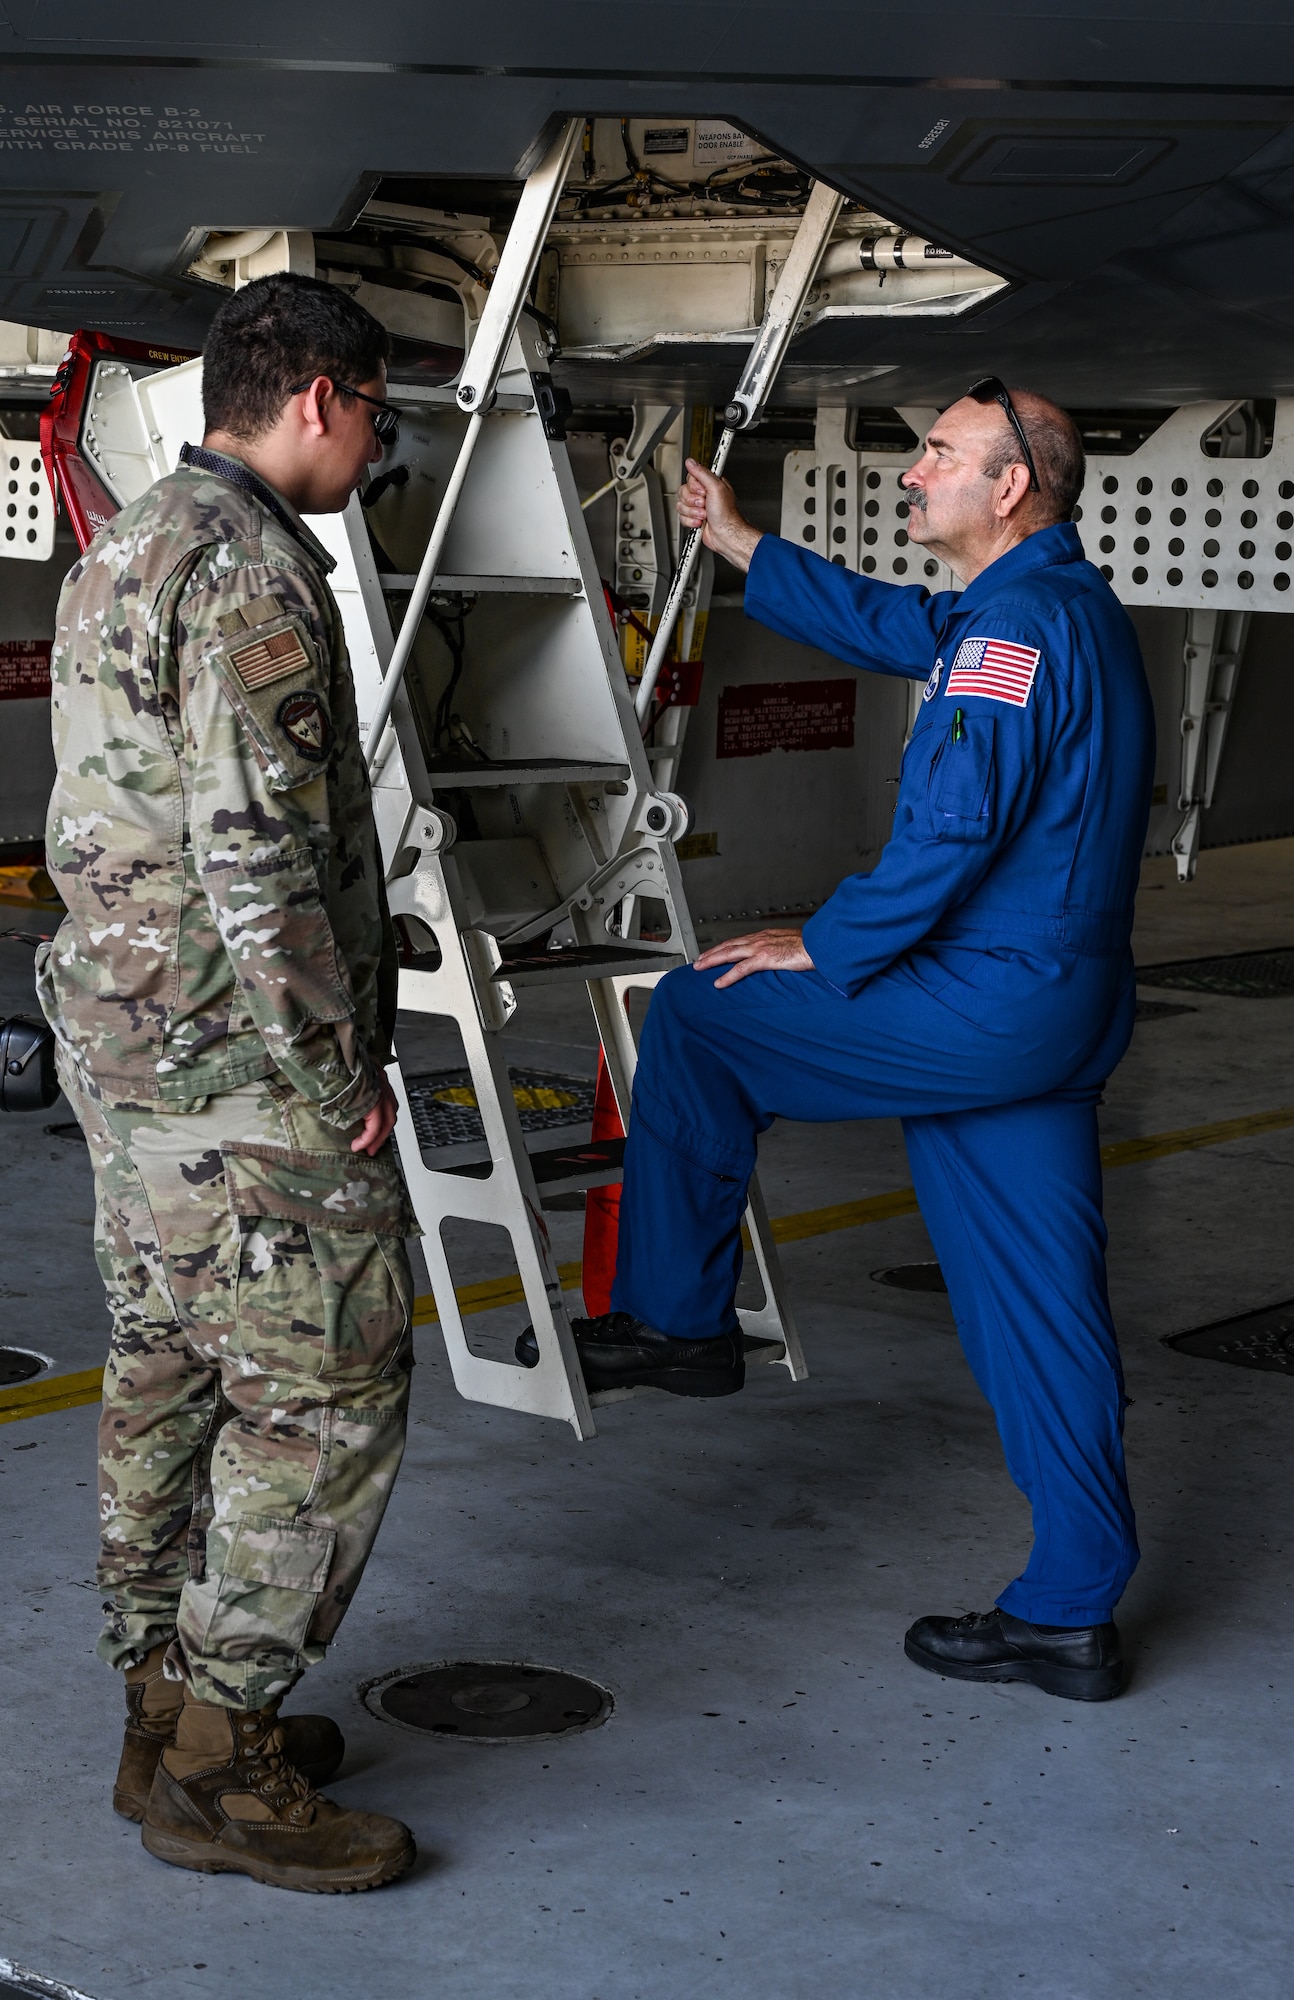 Tom Parent, NASA Aircraft Operations Division pilot and a U.S. Air Force B-2 Spirit crew chief, climb into the cockpit of the stealth bomber at Whiteman Air Force Base, Missouri, June 7, 2022. NASA and the 509th Bomb Wing engaged in cross-organizational communication, discussing common mission components between the two organizations. Finding new ways to enhance current partnerships ensures innovation and growth, allowing men and women of the 509th BW to maintain the most lethal combat force in the world.